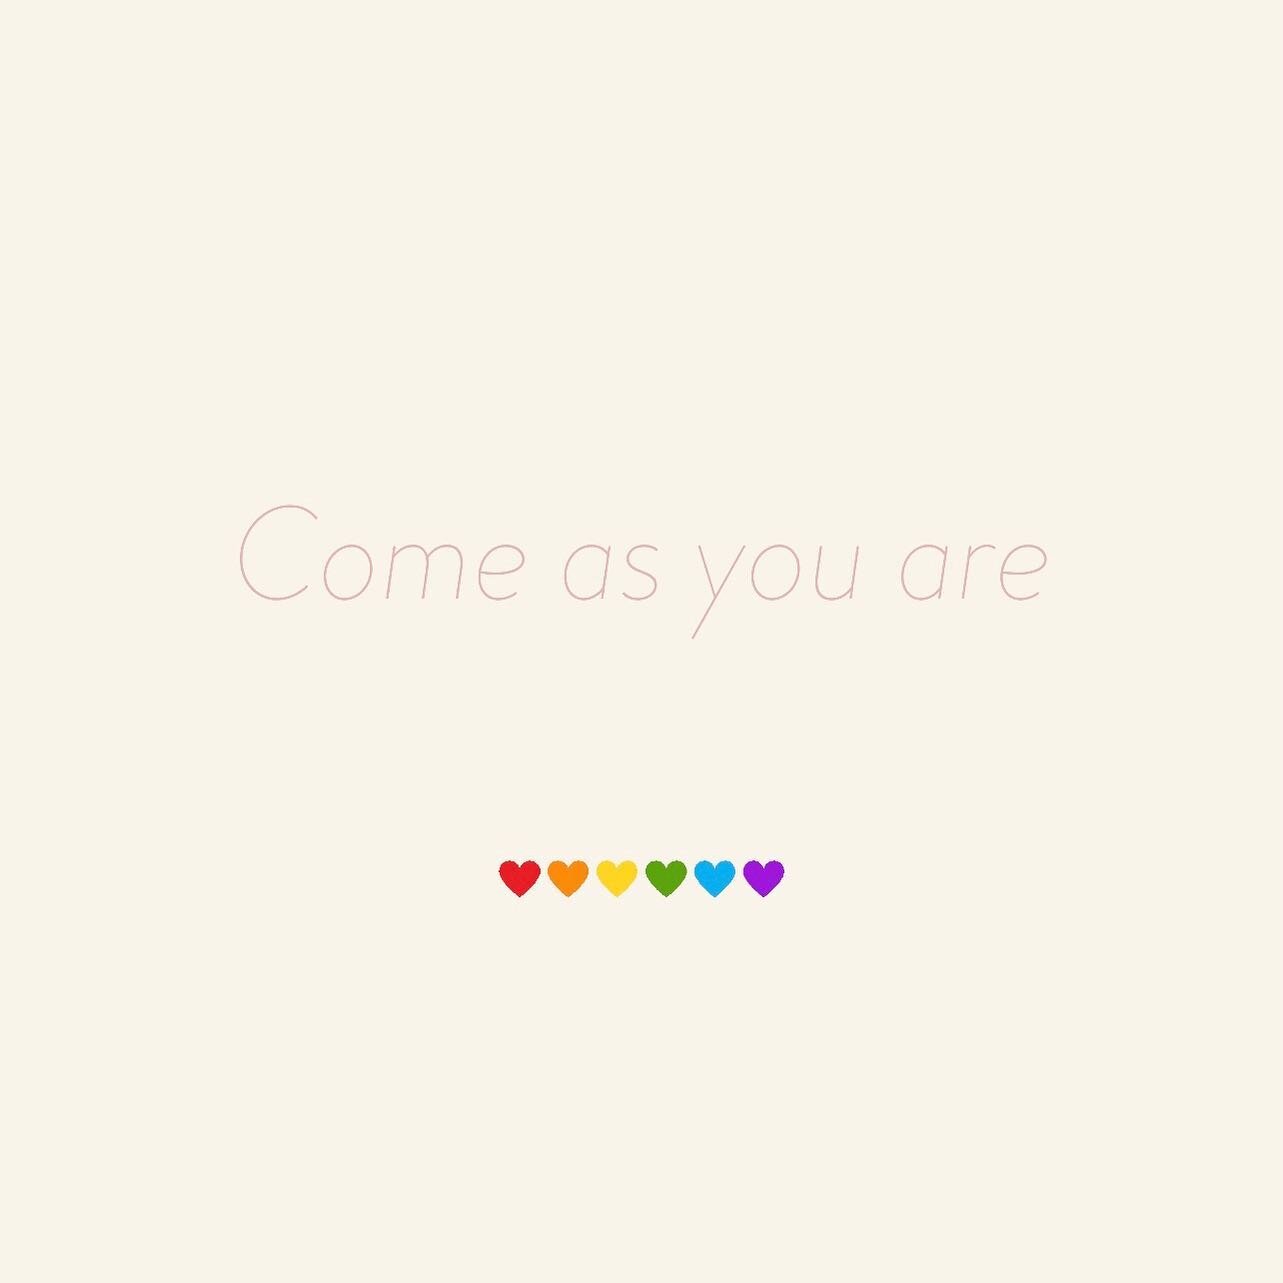 Everyone is always welcome here at The Chiro Room 🏳️&zwj;🌈 🏳️&zwj;⚧️